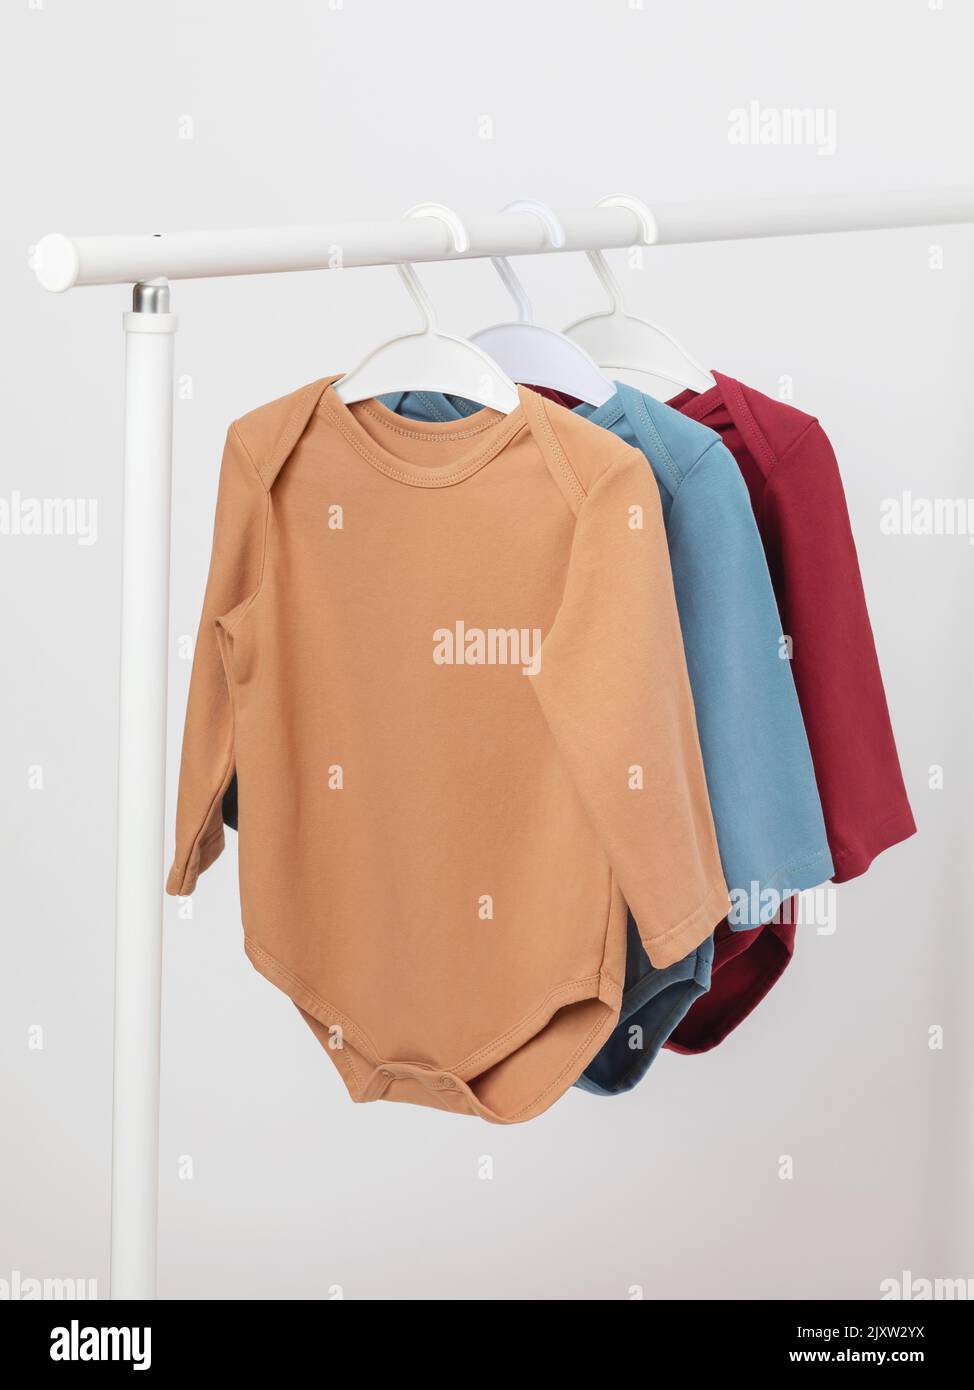 Baby overalls with long sleeves on a hanger, baby bodysuits in three colors Stock Photo